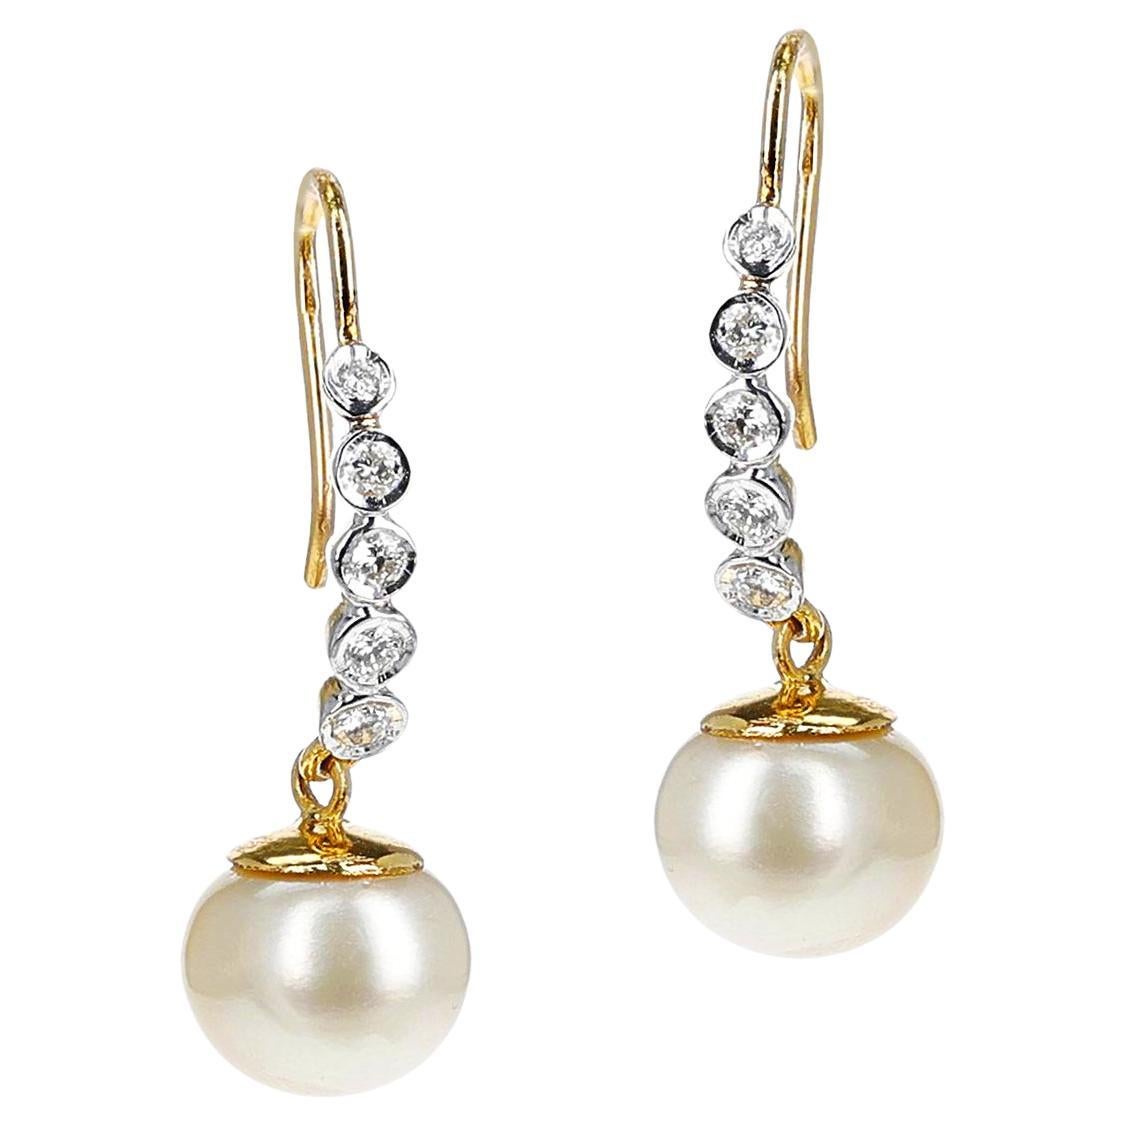 16.06 Ct. South Sea Pearl Dangling Earrings with 0.43 Ct. Diamonds, 14K For Sale